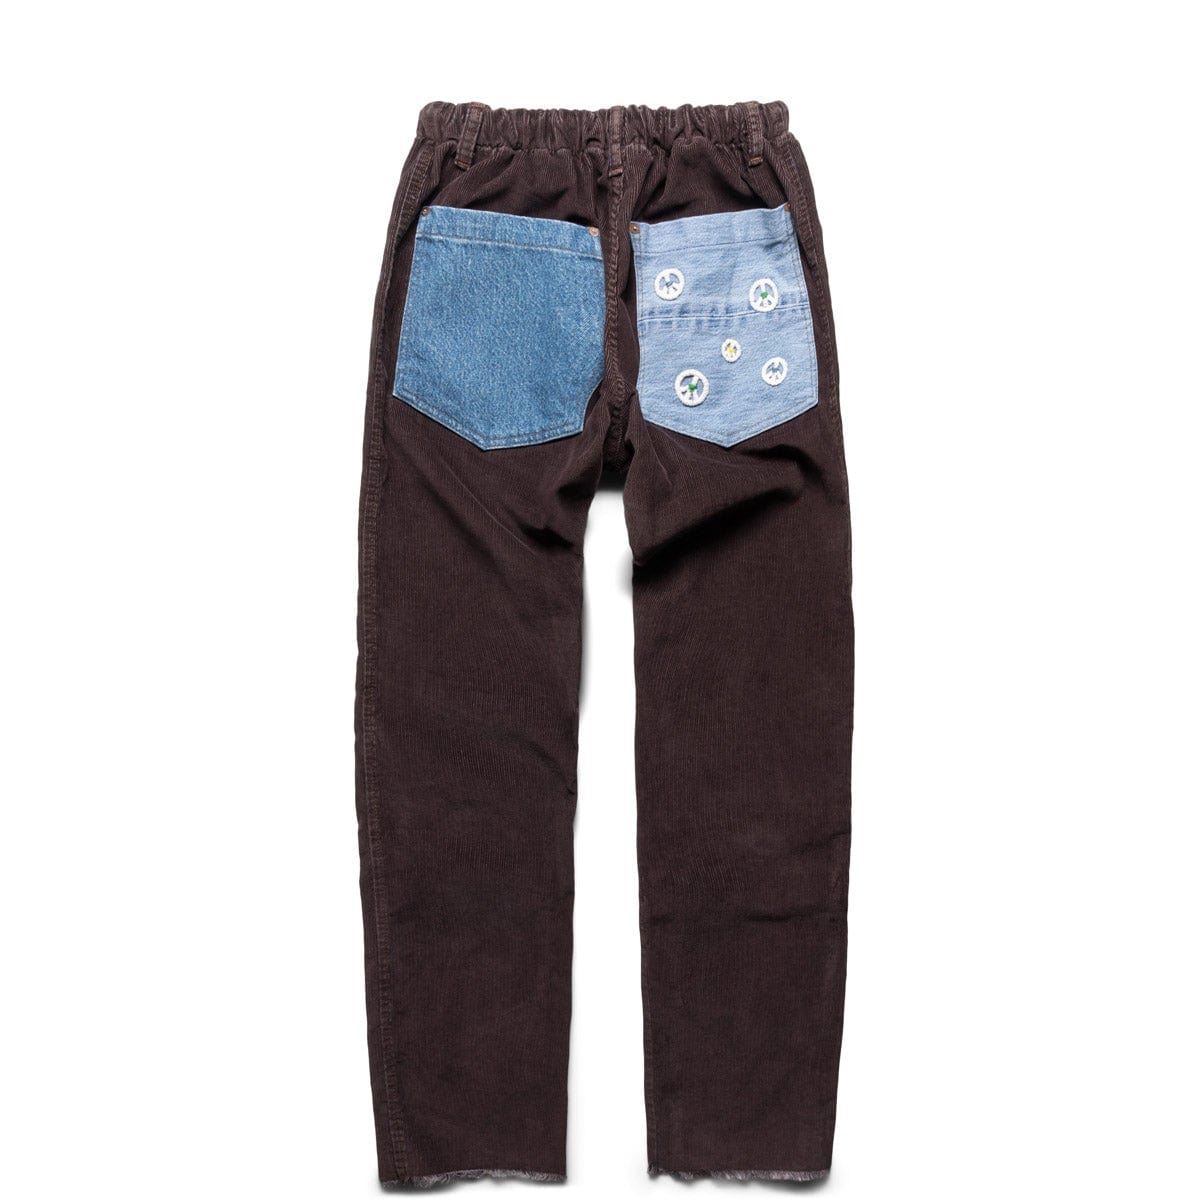 Dr. Collectors Bottoms P38 RECYCLED DENIM POCKETS